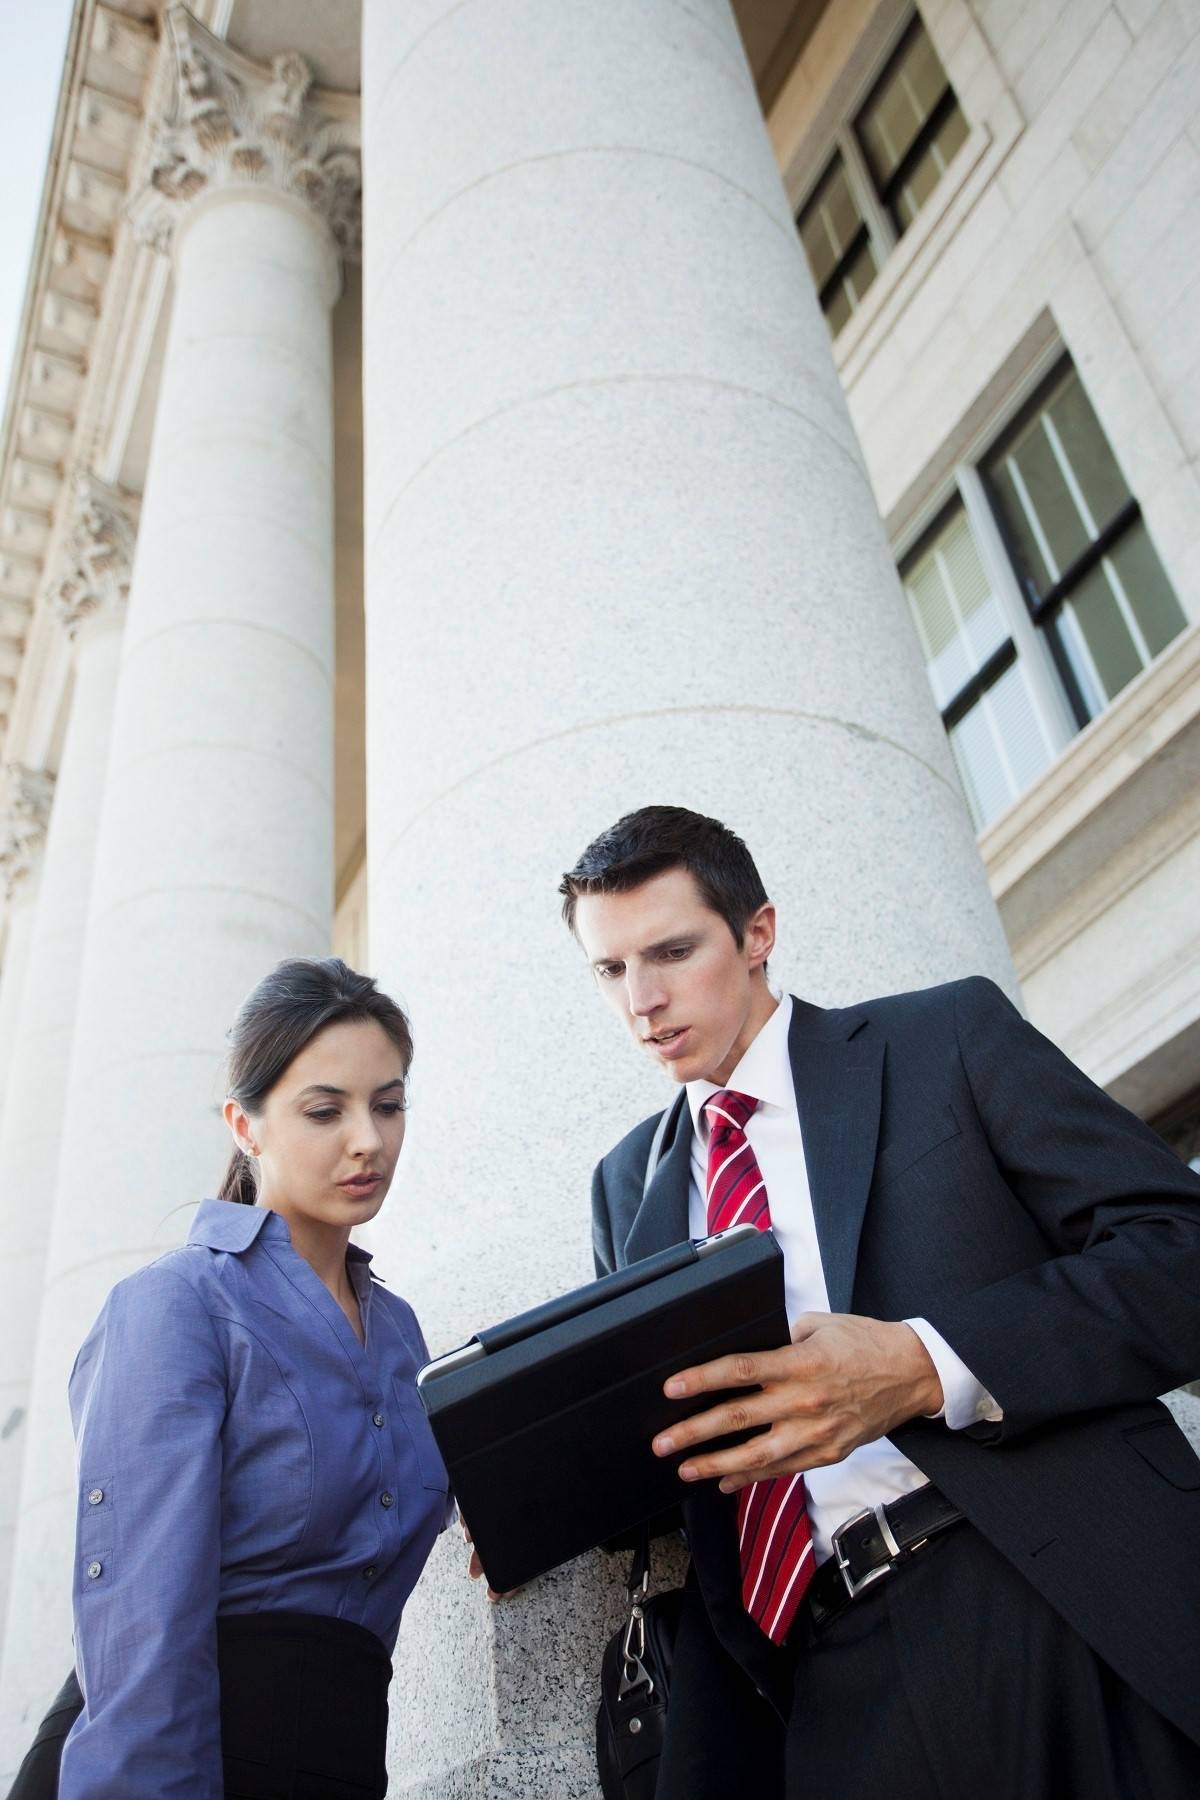 Two business people looking at a tablet on the steps of a building